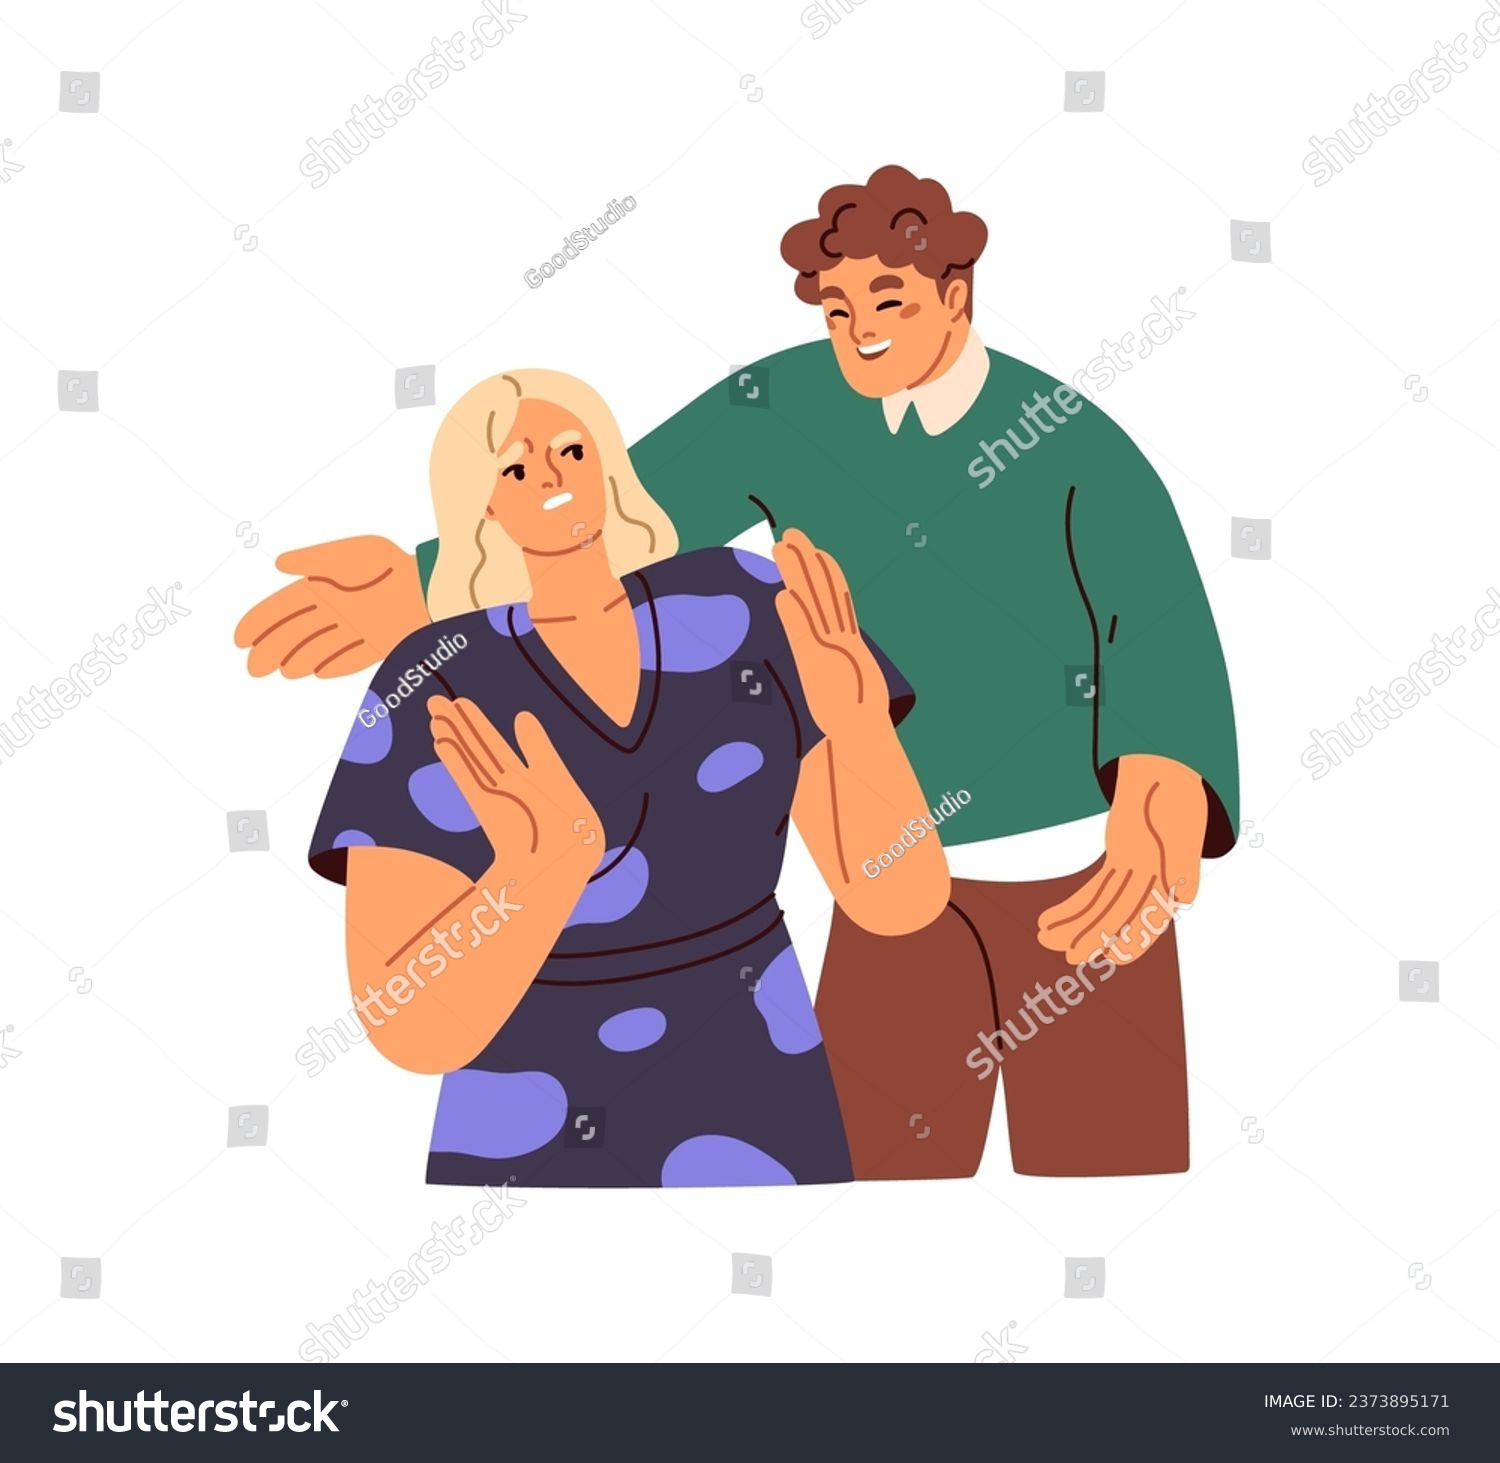 SVG of Intrusive man, unwanted hugs, unwelcome awkward touch. Harassment, unrequited love concept. Embarrassed woman hates unpleasant nasty guy. Flat graphic vector illustration isolated on white background svg